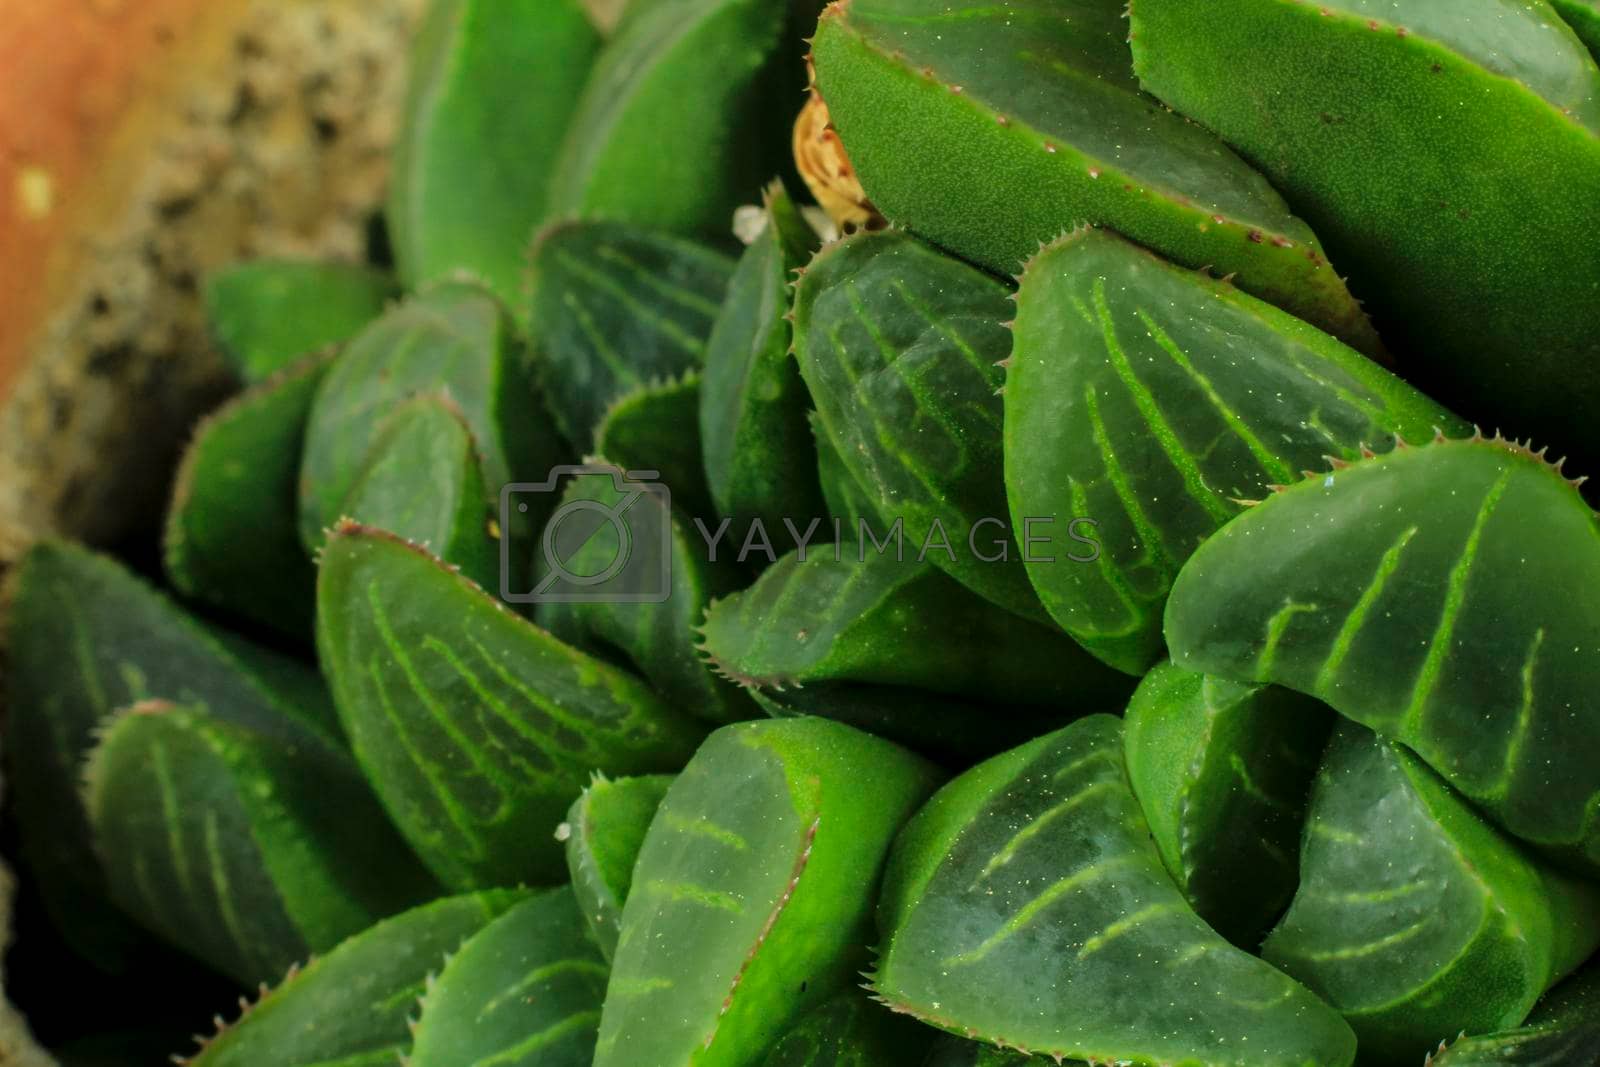 Royalty free image of Haworthia Retusa succulent plant in the garden by soniabonet